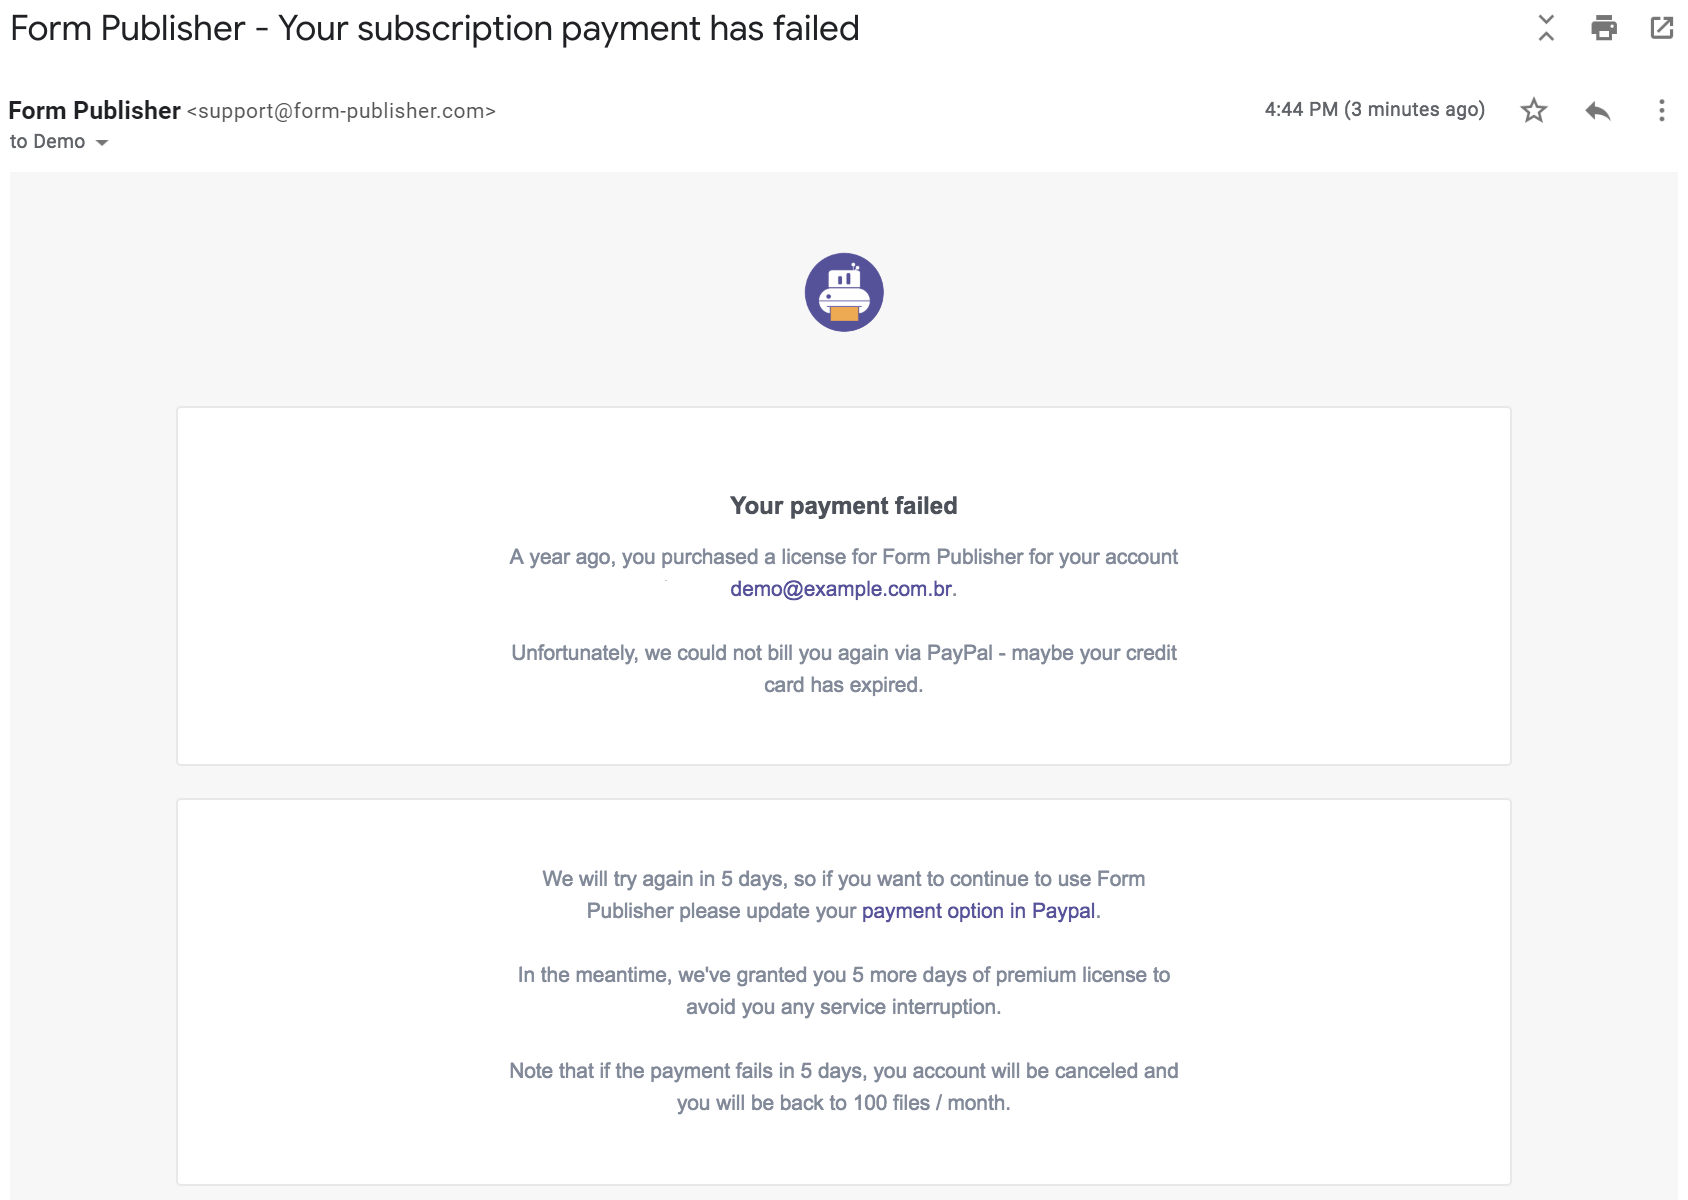 Your_subscription_payment_has_failed_has_been_suspended1.png